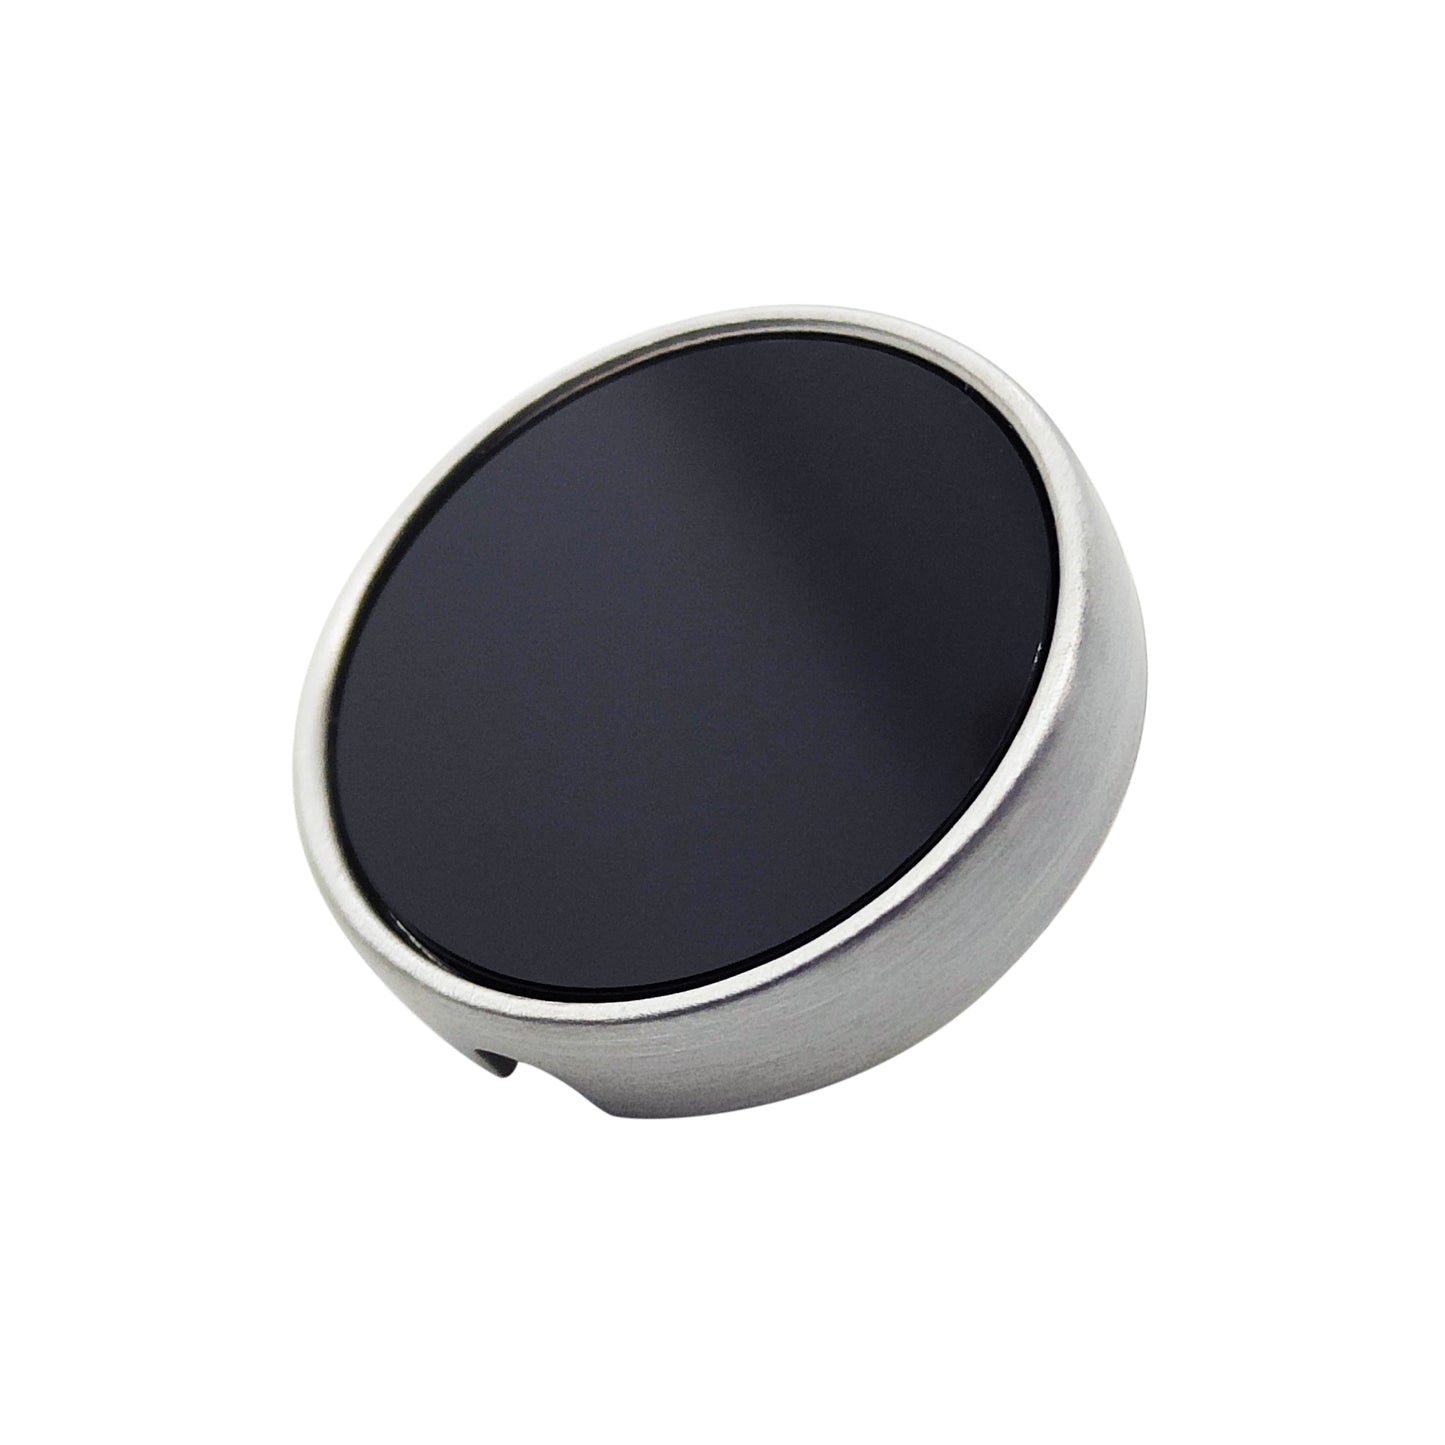 21mm button in brushed gold metal and black onyx